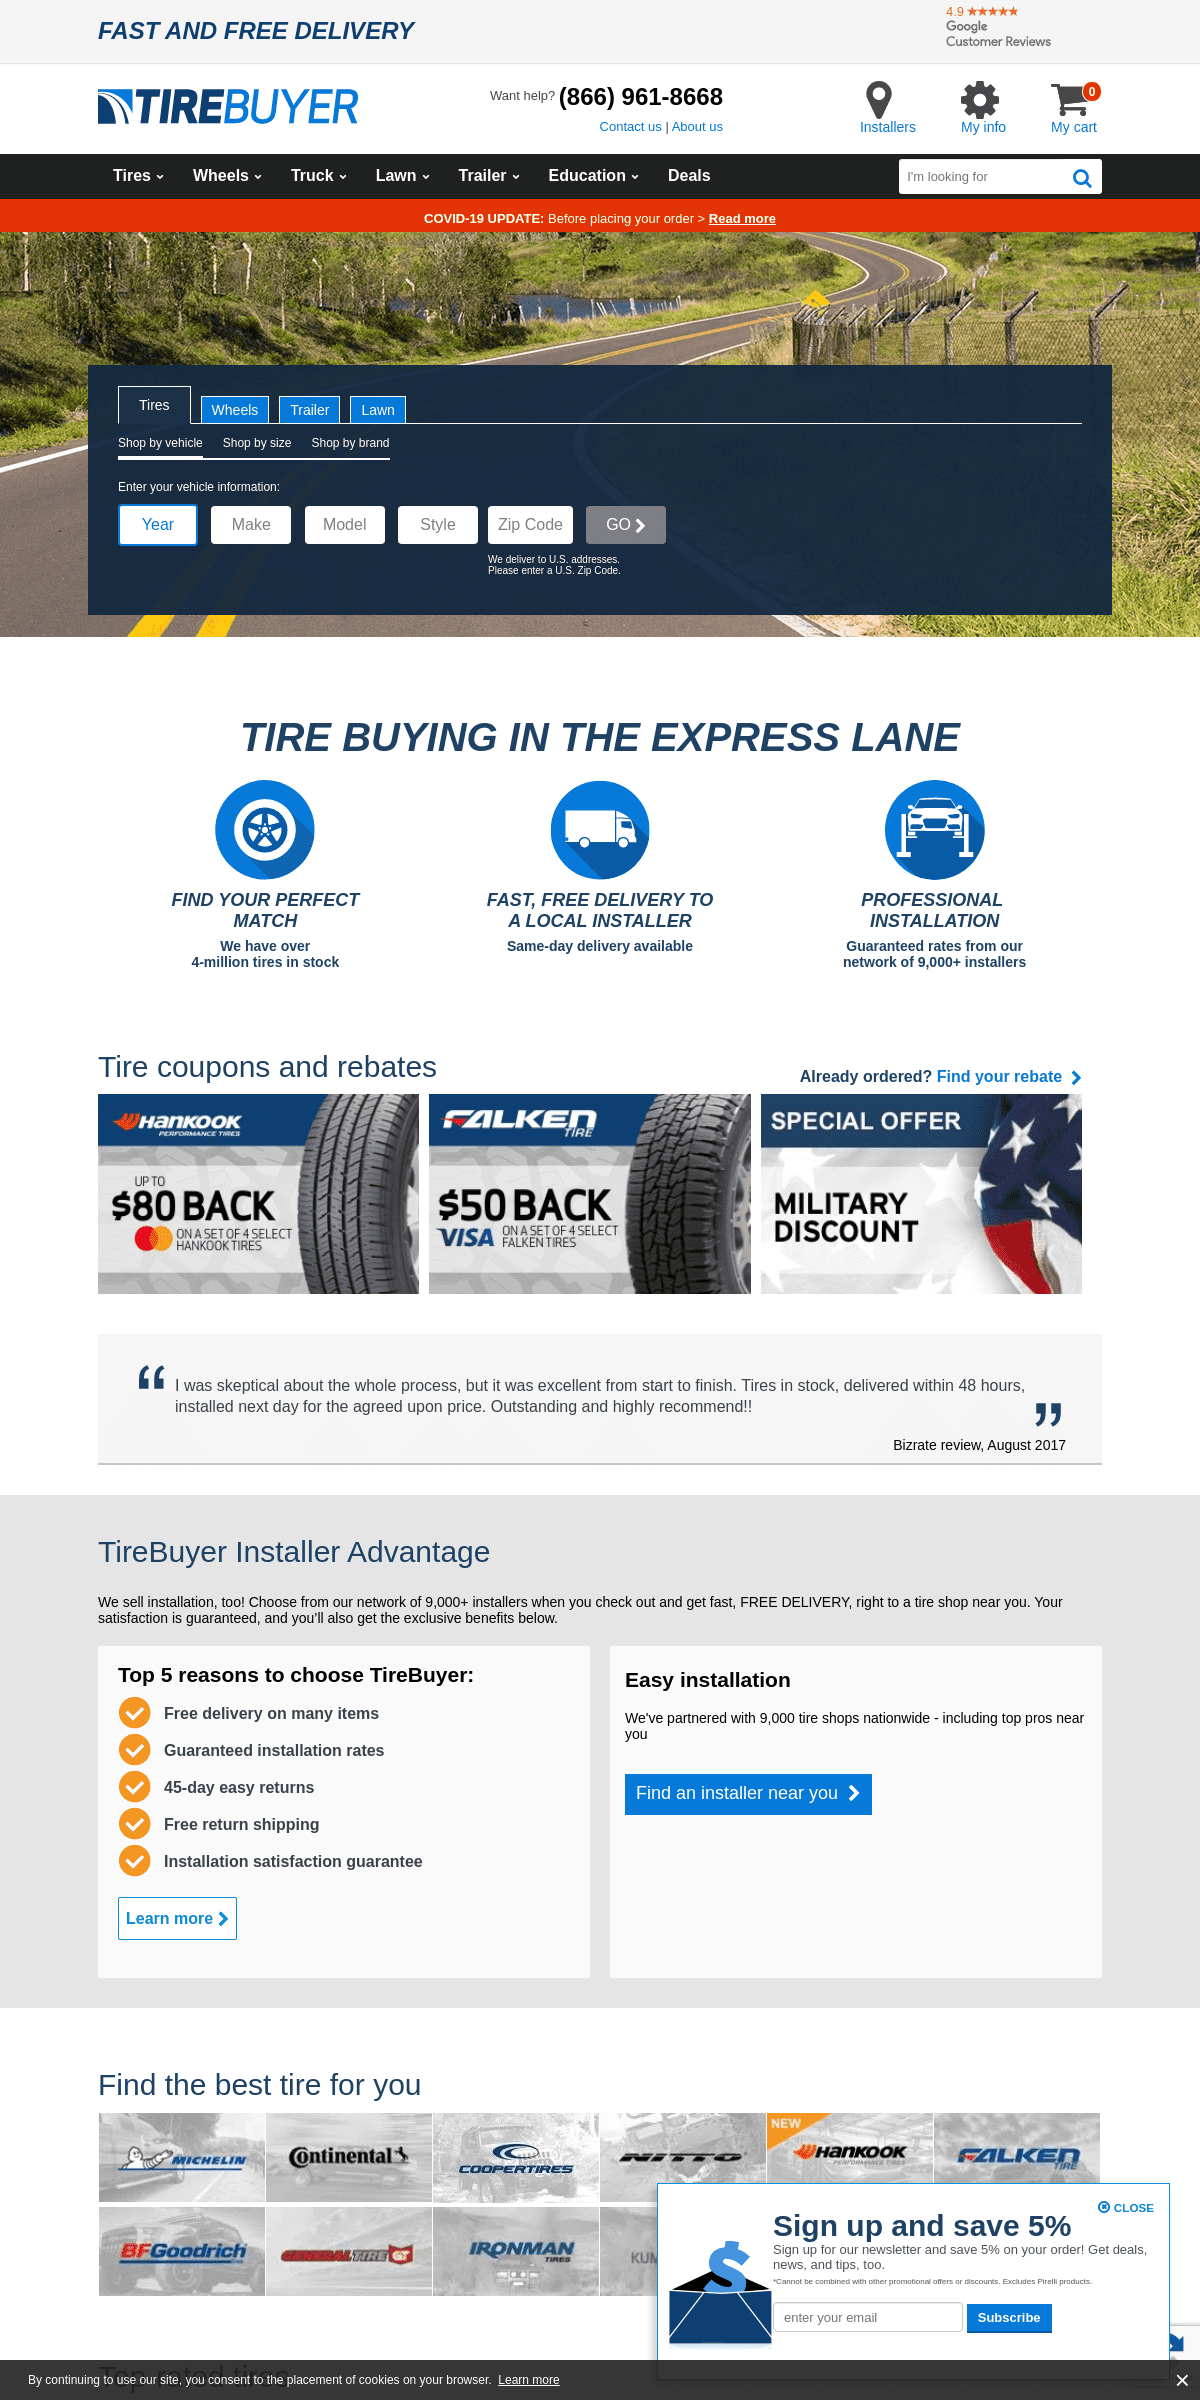 A complete backup of tirebuyer.com